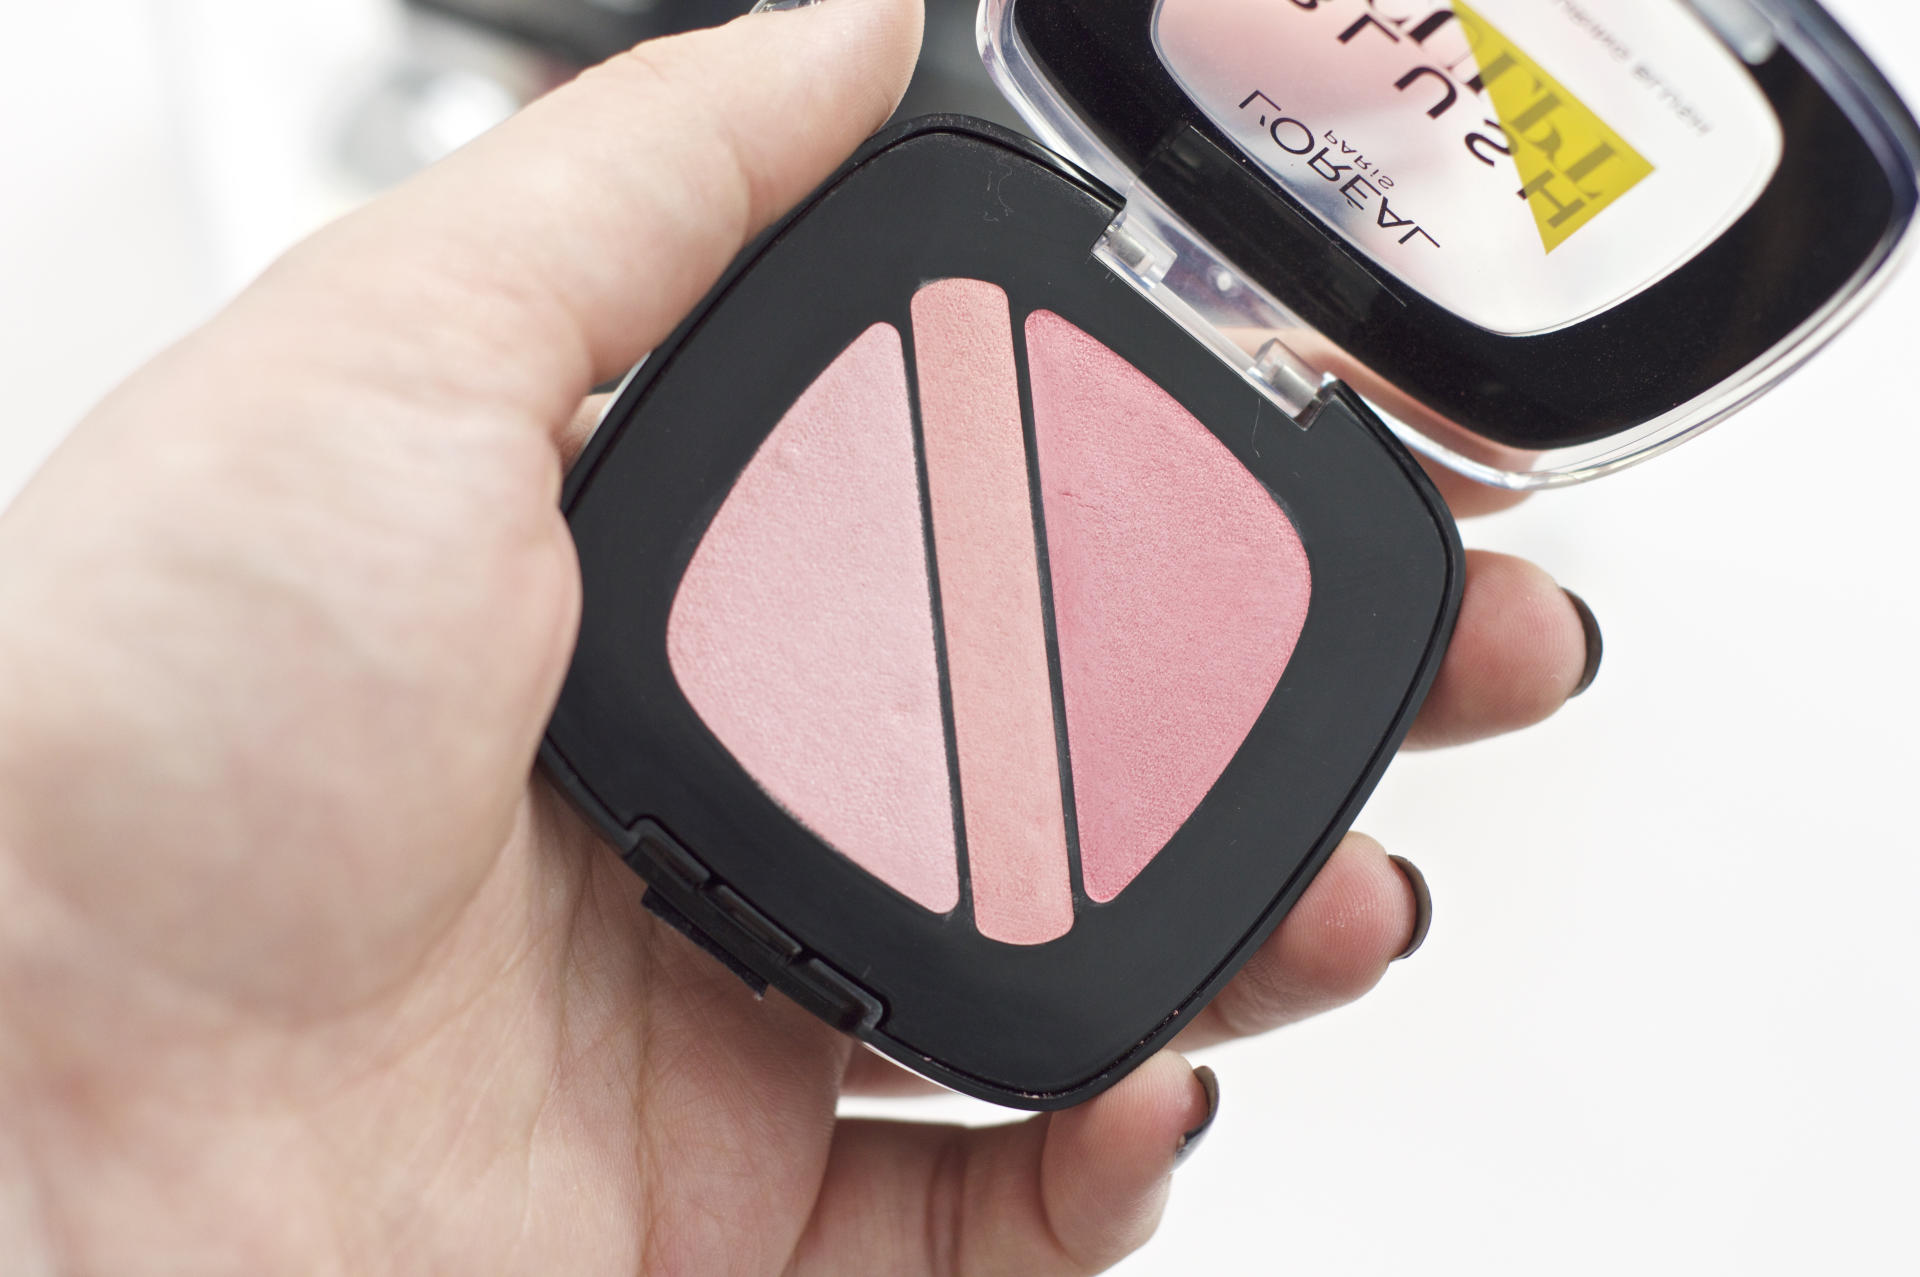 Made From Beauty L'Oreal Infallible Sculpt Blush in Soft Rosy